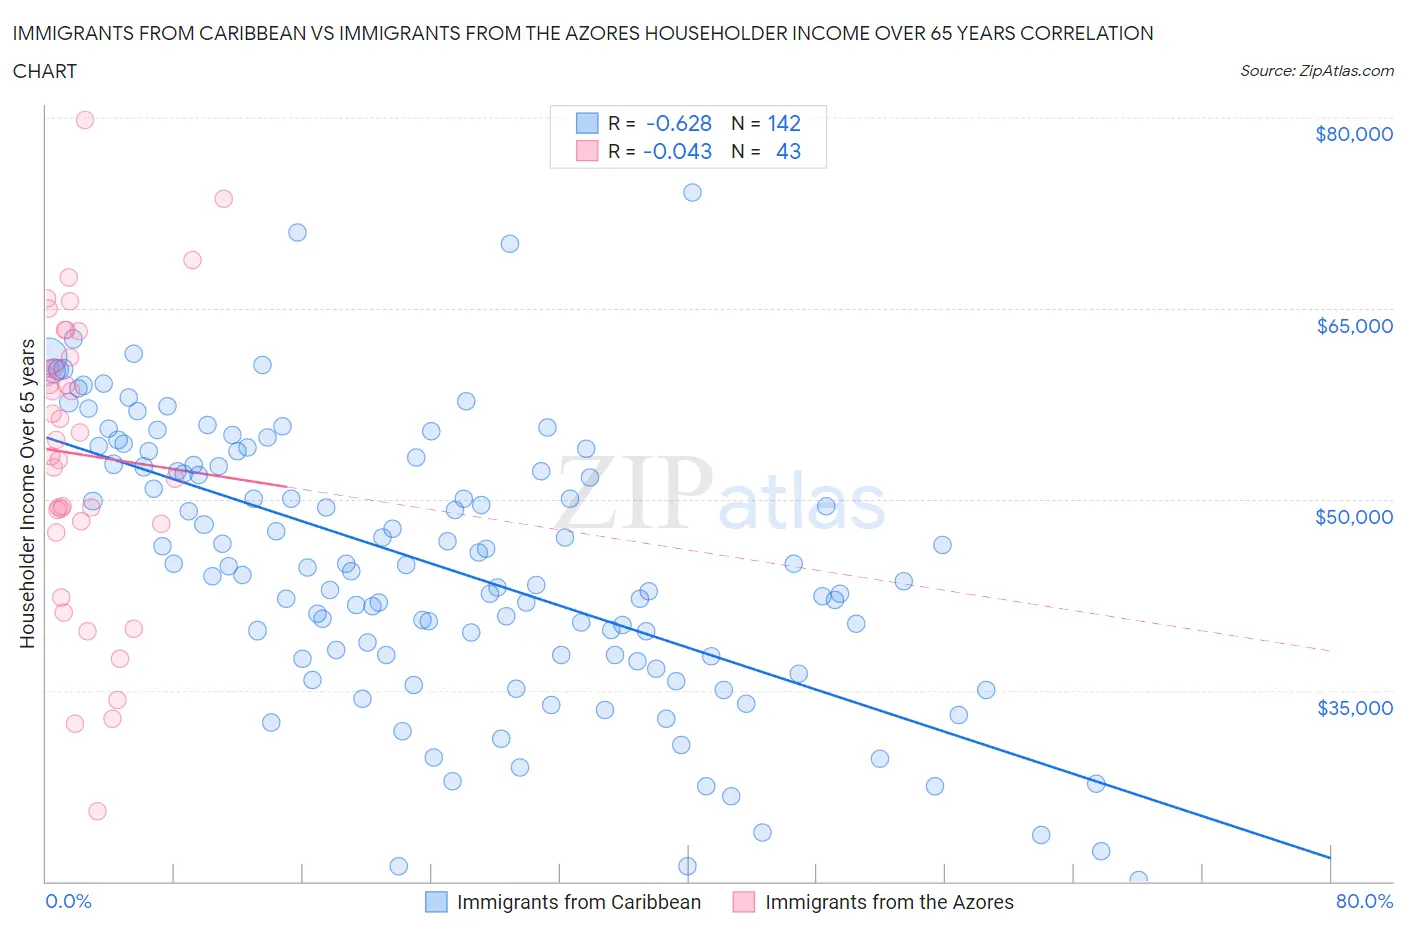 Immigrants from Caribbean vs Immigrants from the Azores Householder Income Over 65 years